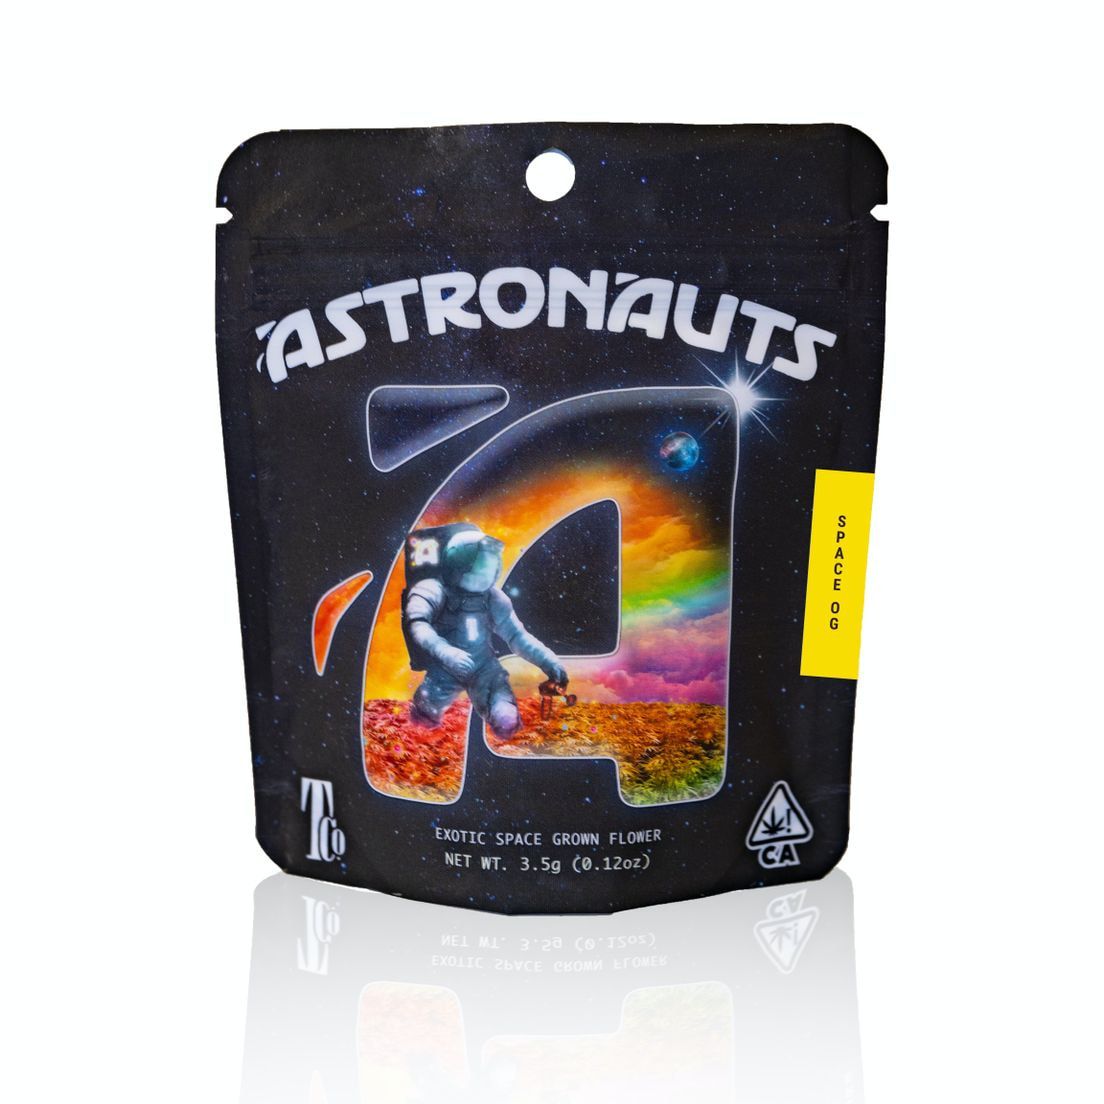 B. Astronauts 3.5g Space Grown Small Flower - Quality 7/10 - Space Black Cherry